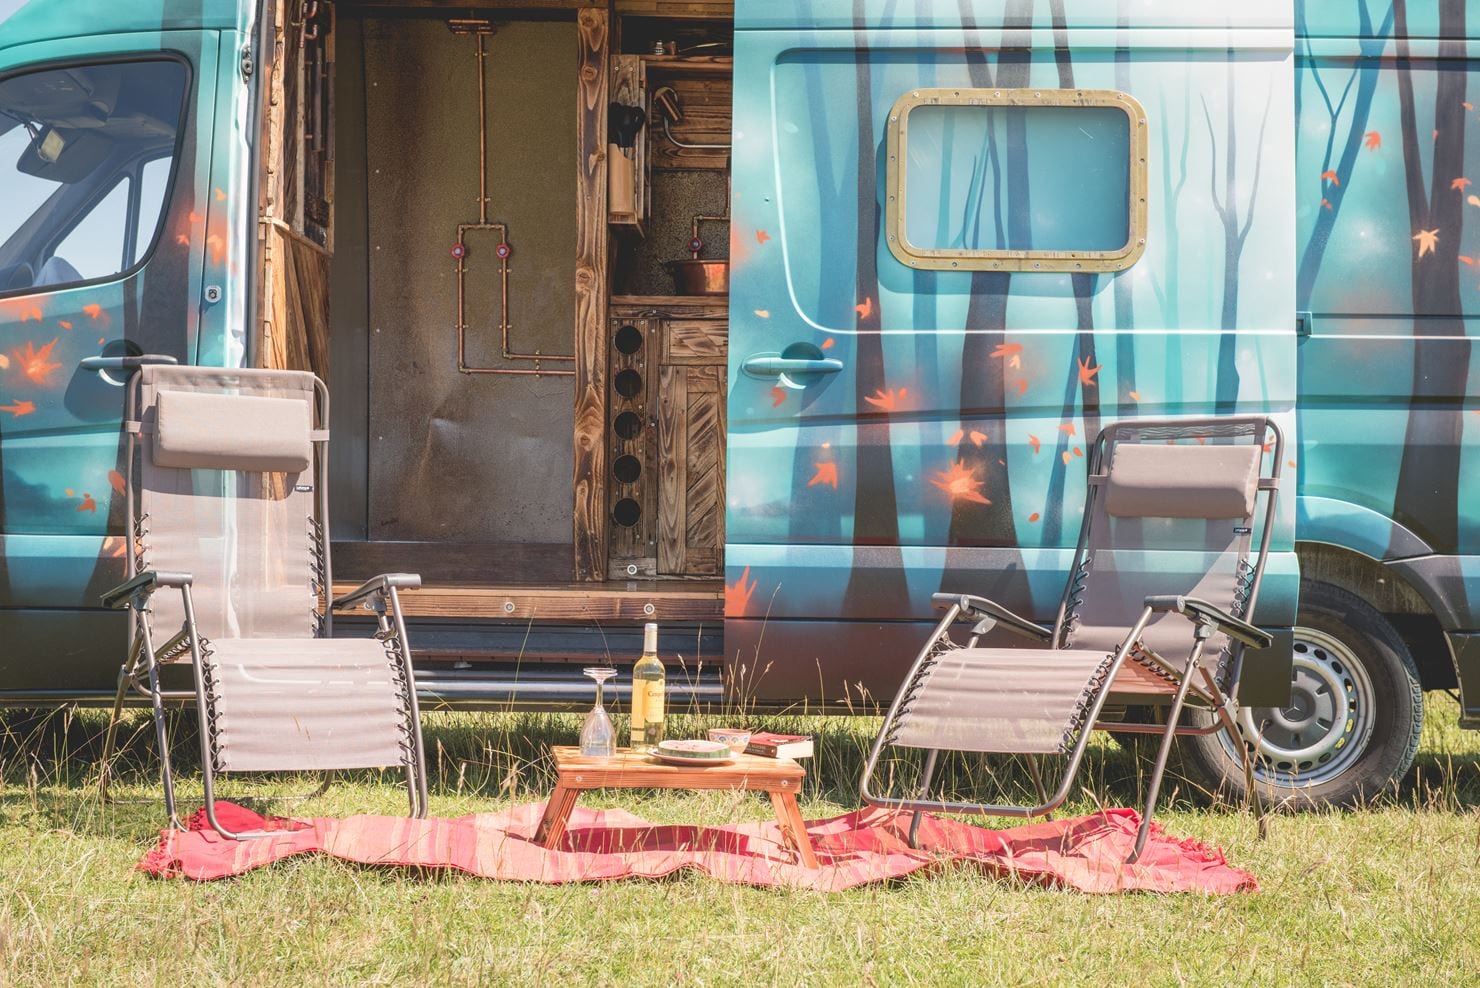 The outside of a campervan with two picnic chairs, wine and a picnic blanket